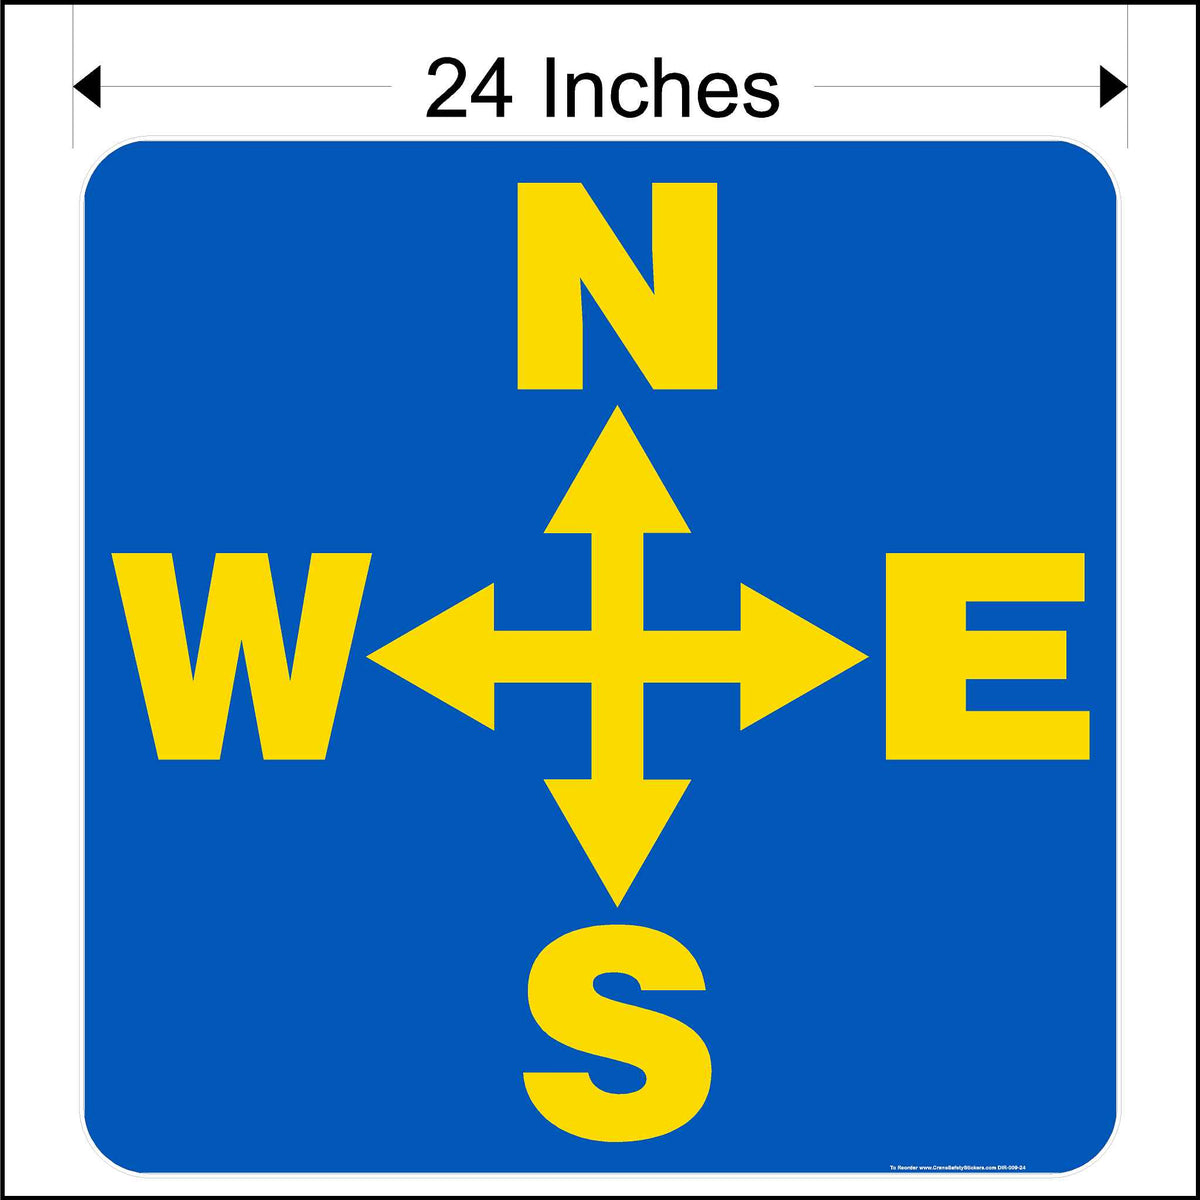 24 inch overhead crane directional decal printed with yellow north, south, east, and west arrows on a blue background.